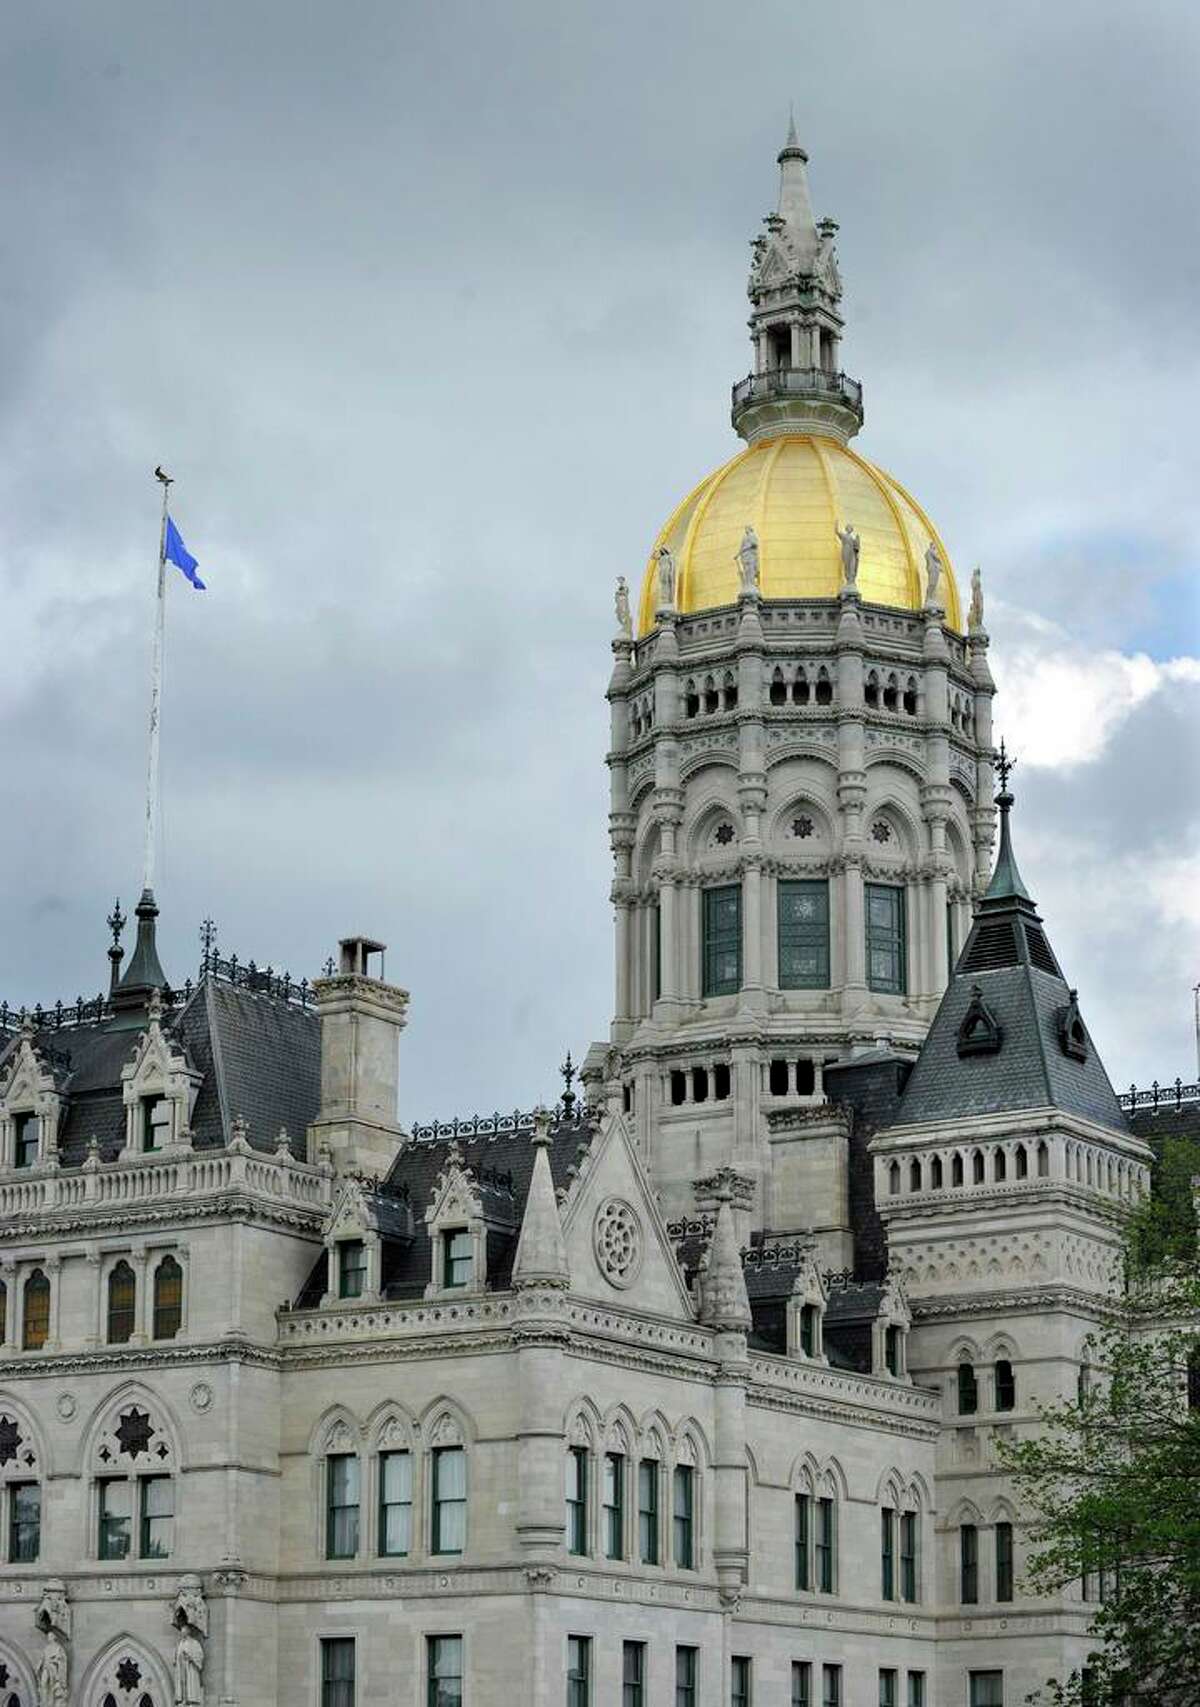 The Connecticut State Capital building in Hartford, Conn.